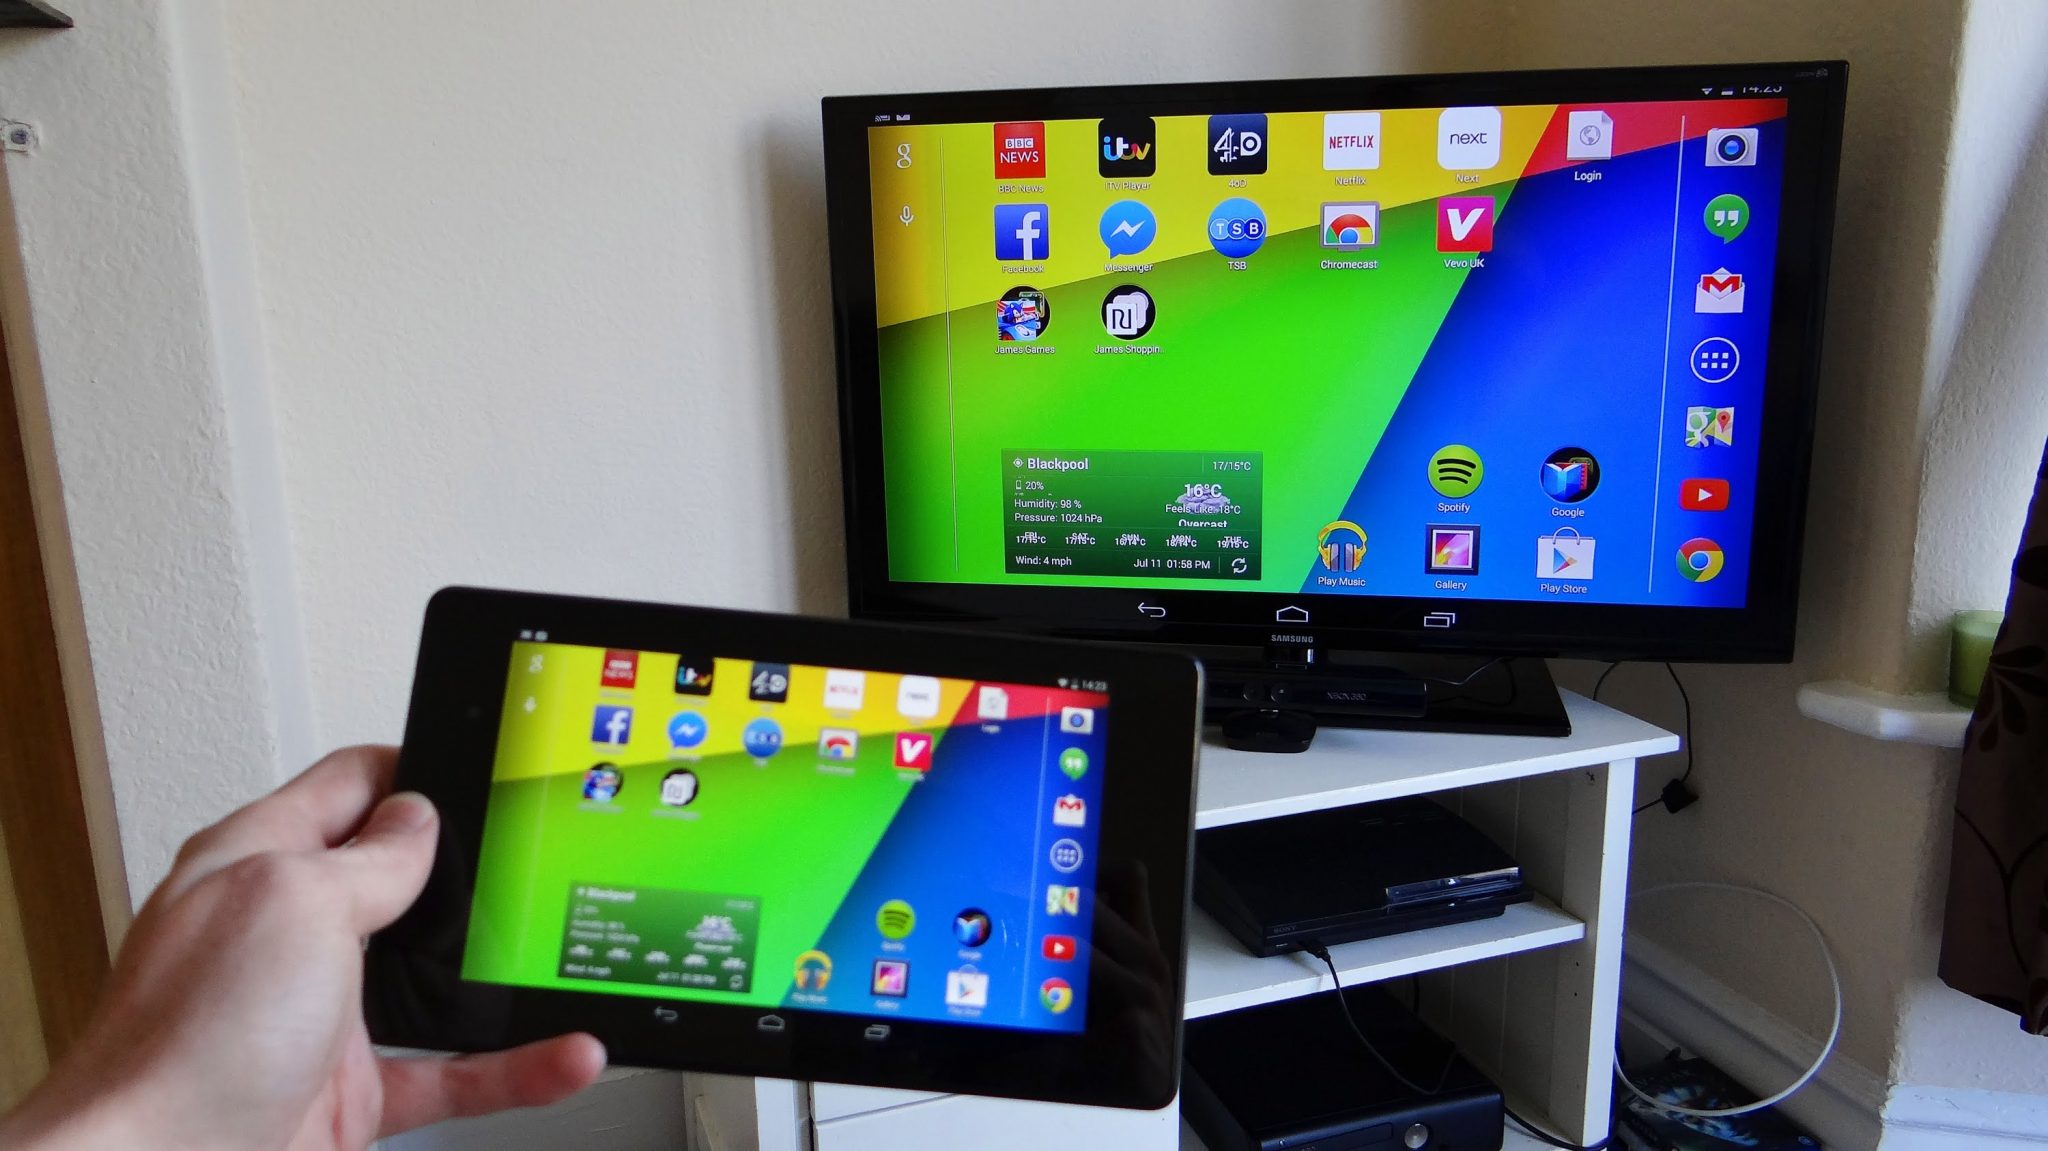 How To Mirror Android To TV â¢ Technobezz